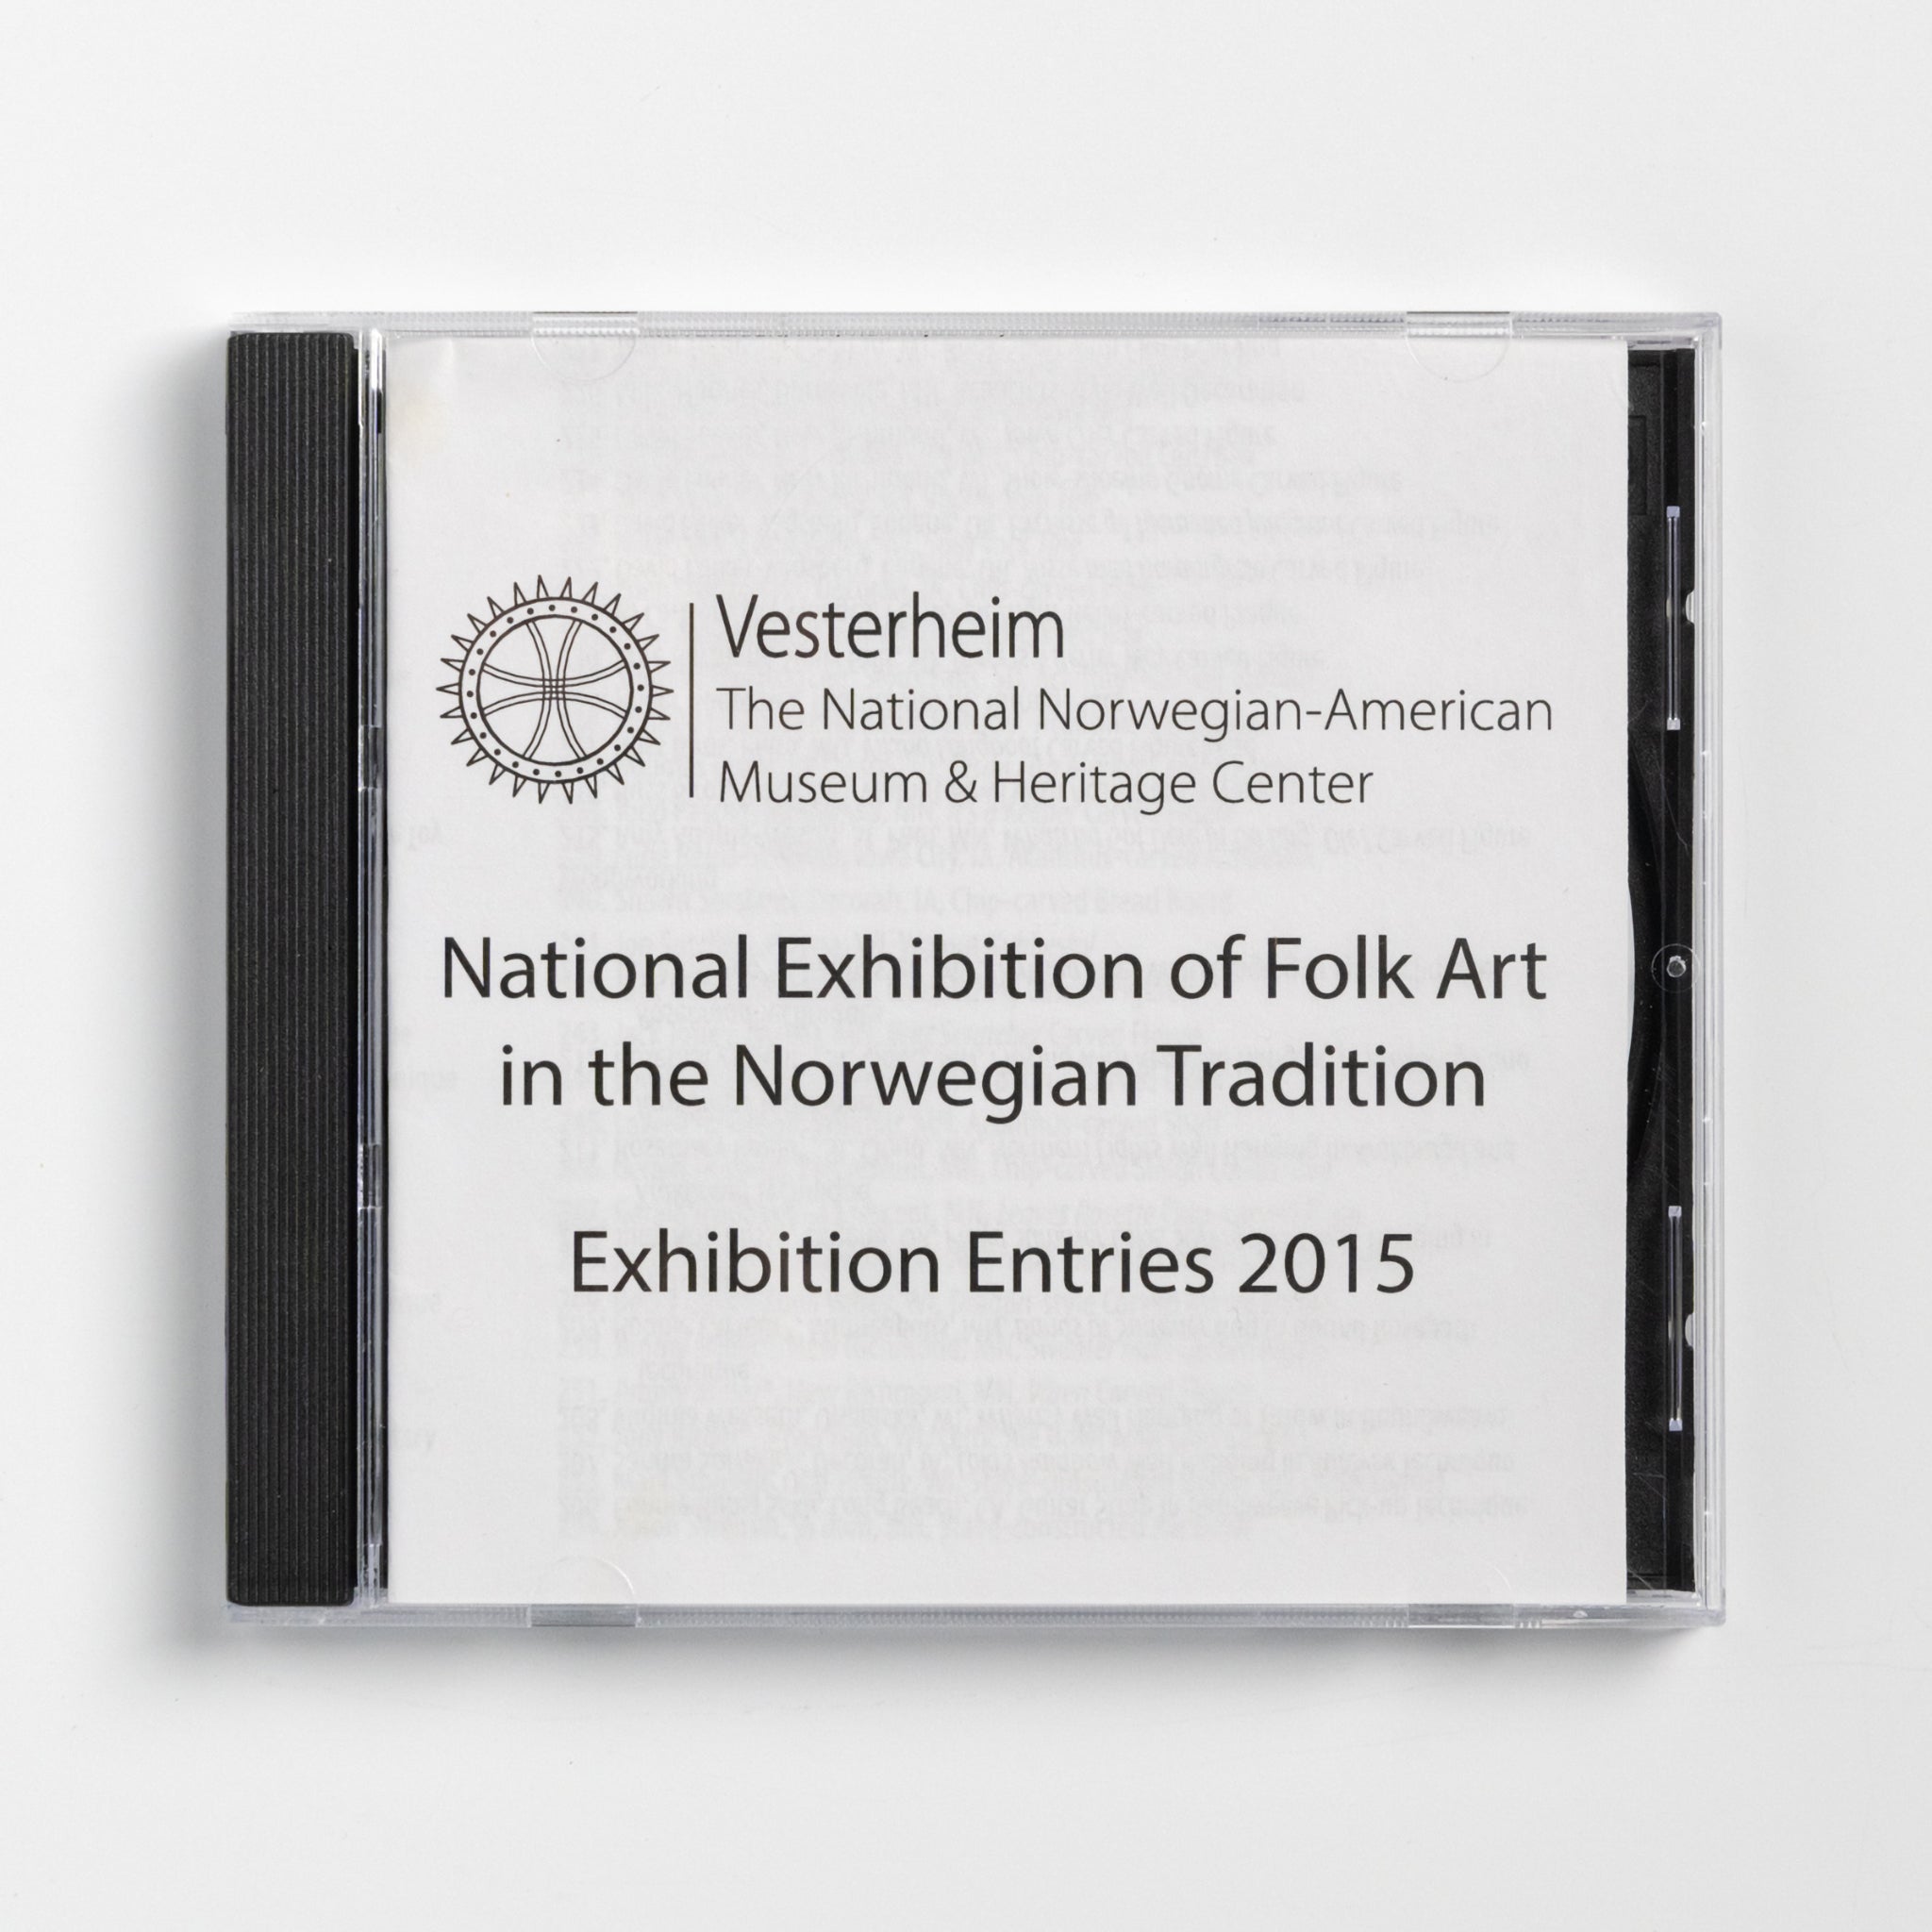 2015 National Exhibition of Folk Art in the Norwegian Tradition - CD of Images